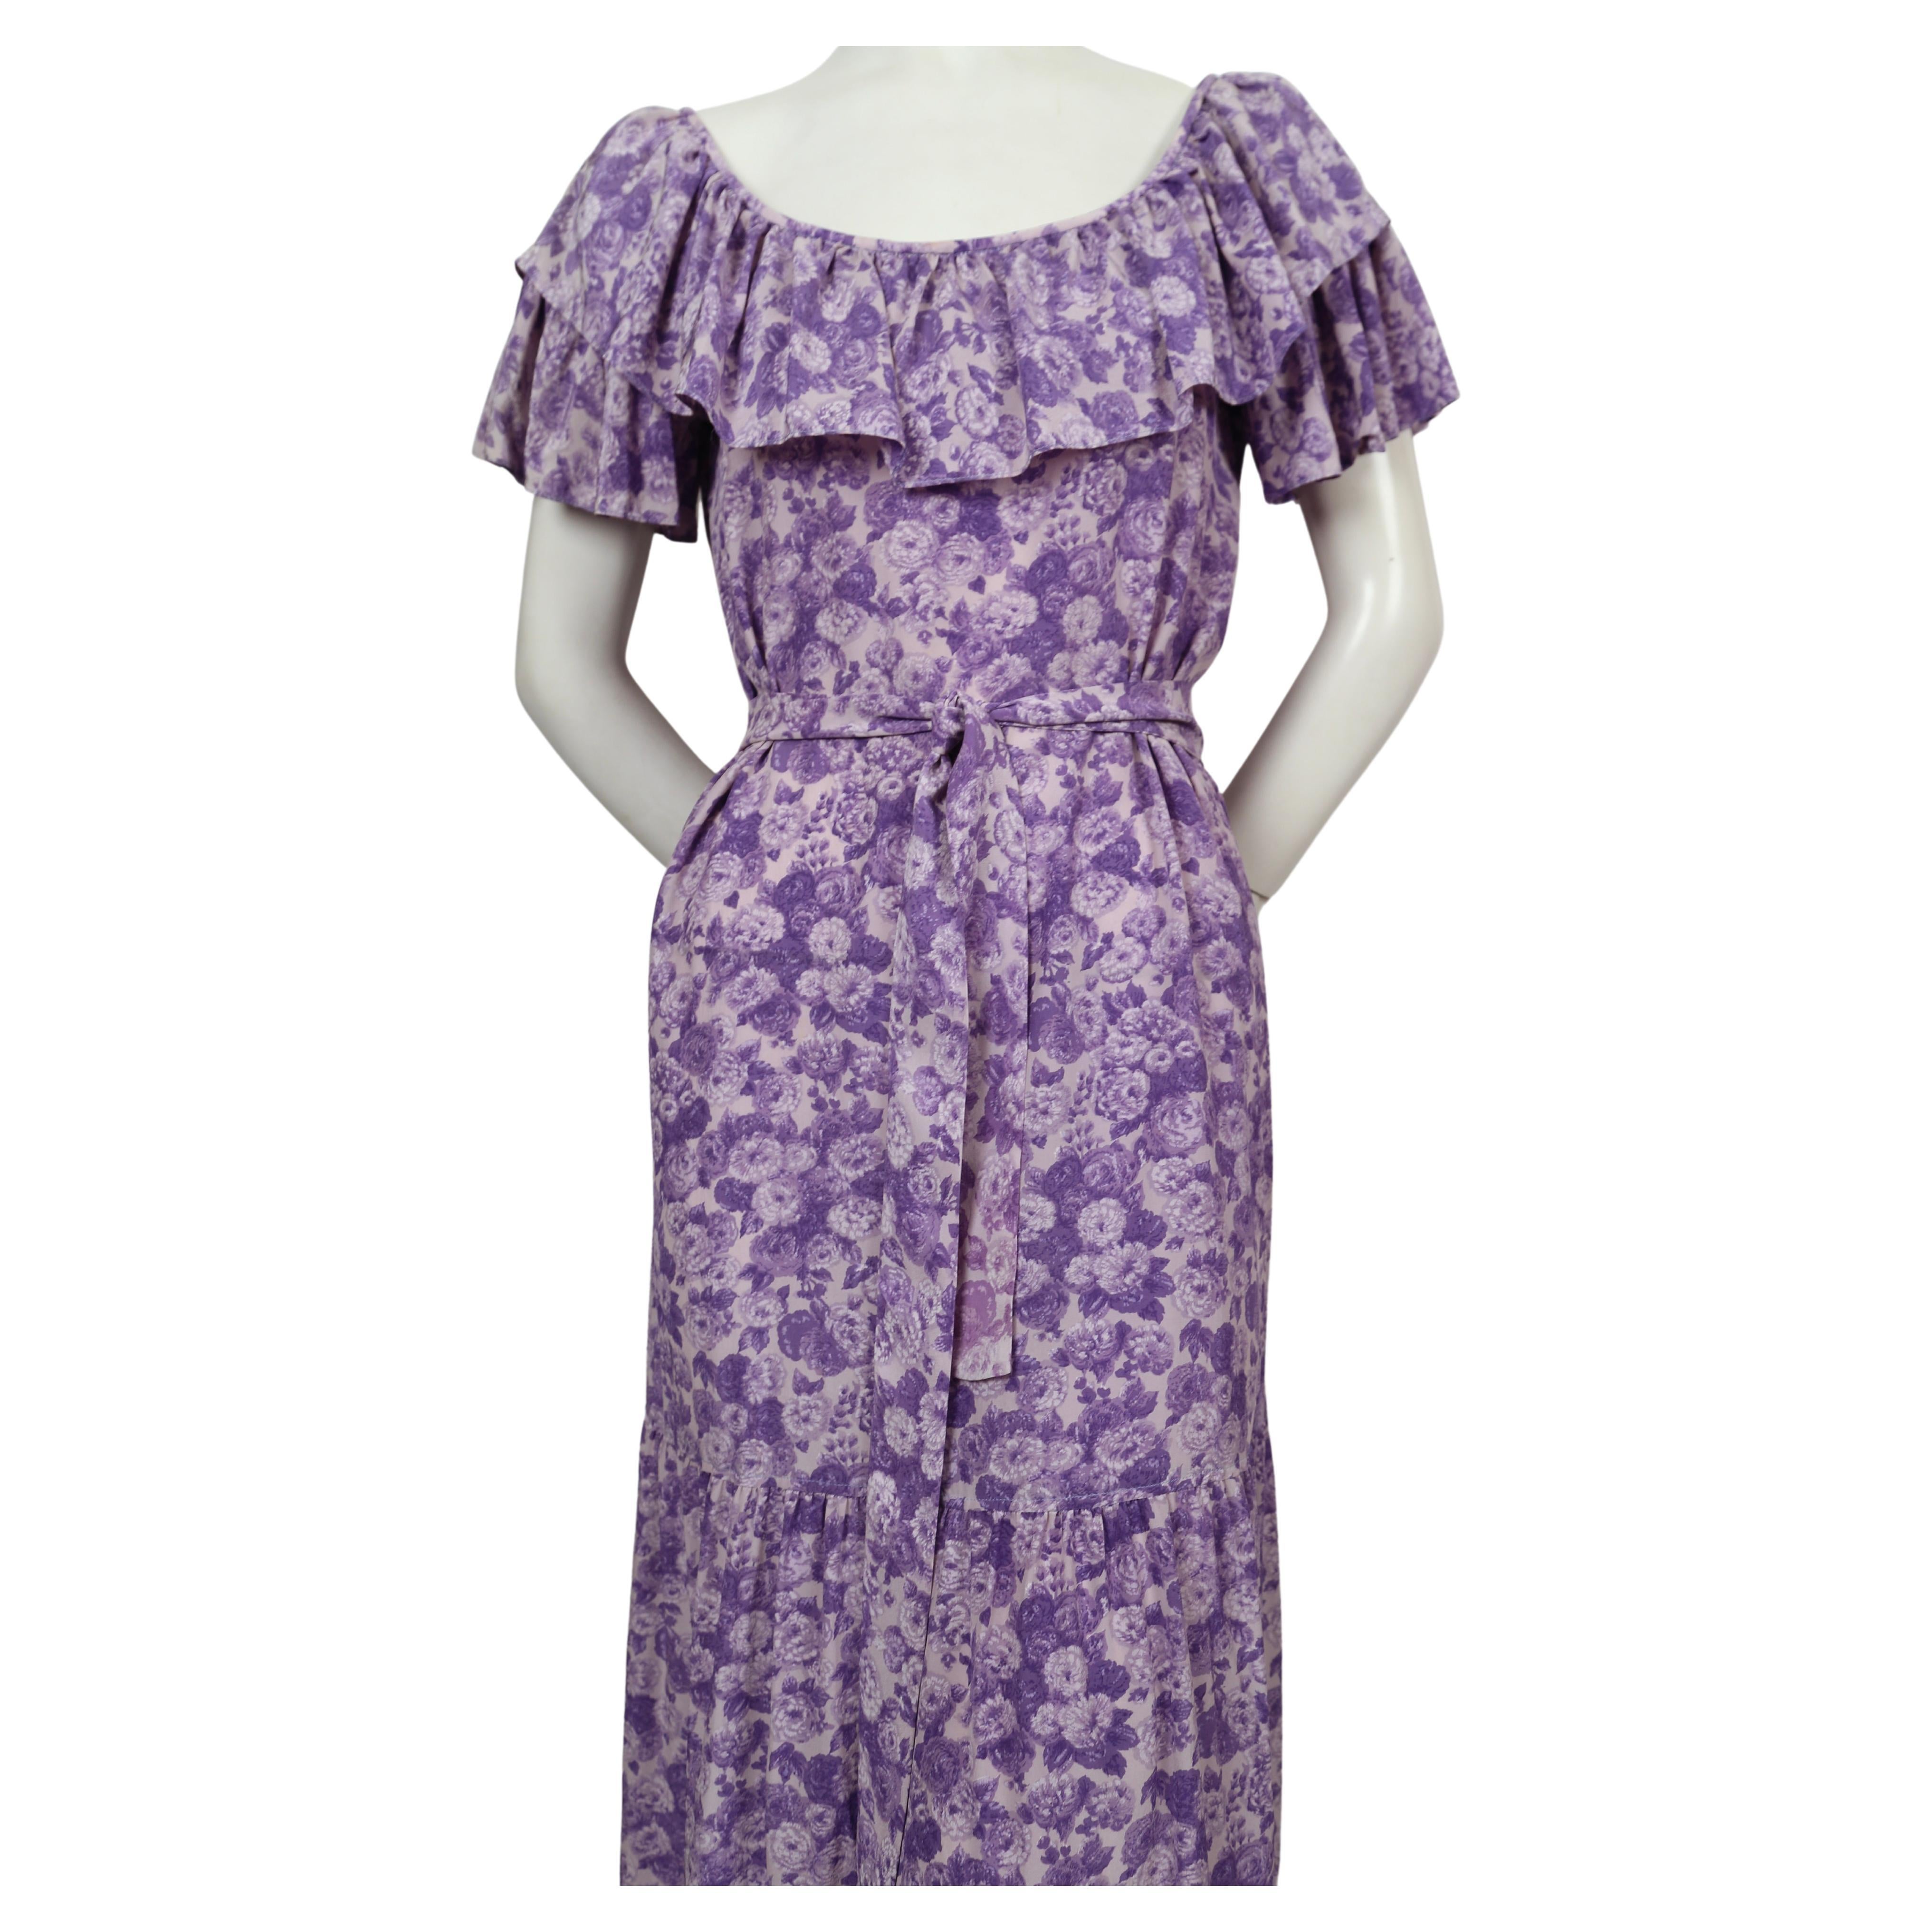 Purple, floral-printed, silk dress with long waist tie from Yves Saint Laurent dating to the 1970's. Labeled a French size 42 however this fits very small, especially if worn off the shoulders. Approximate measurements: up to a 35